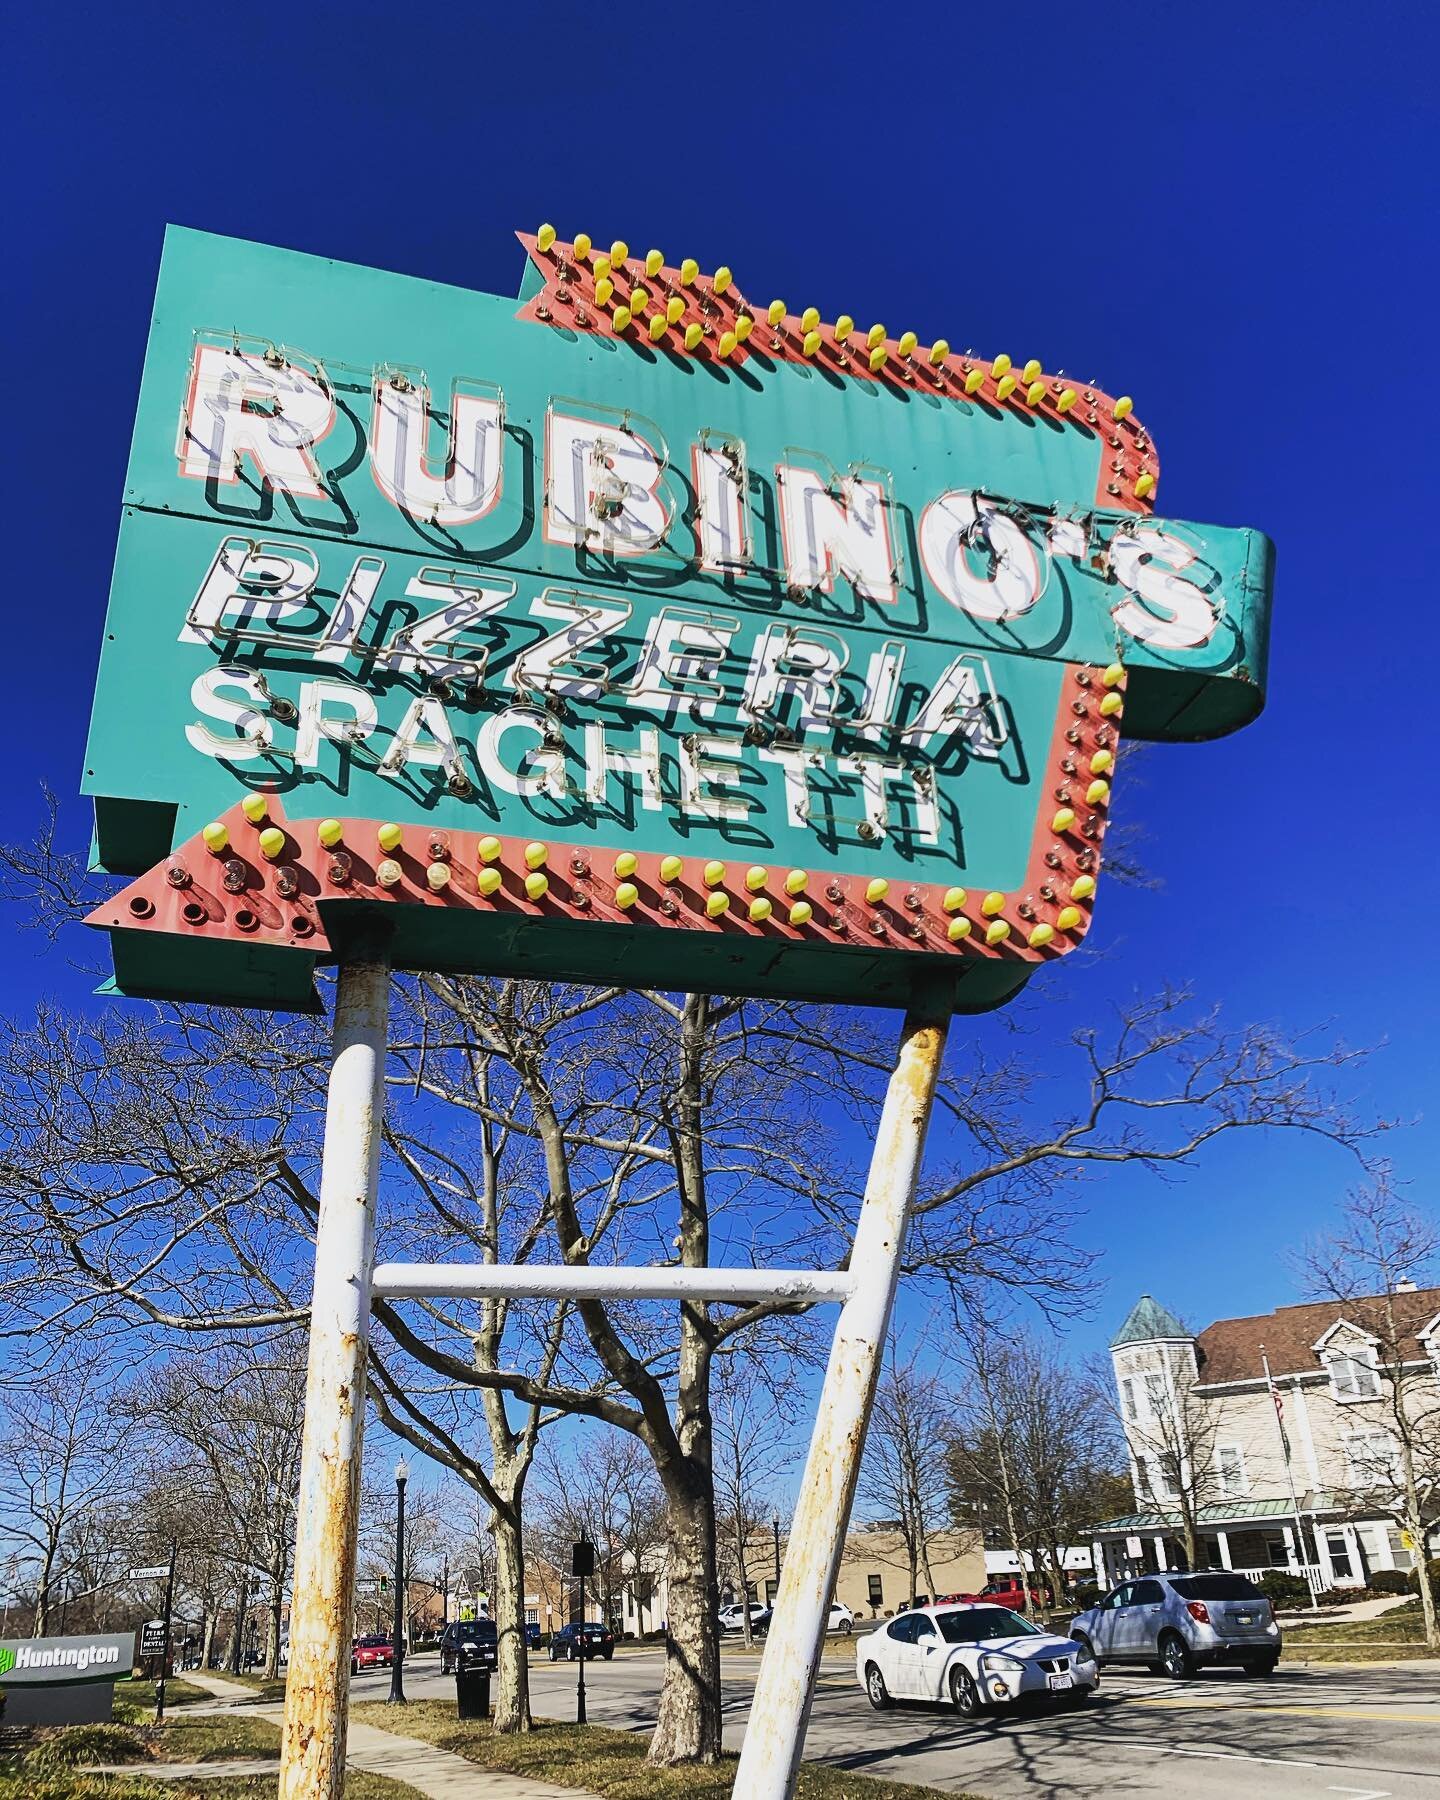 Rubino&rsquo;s is back for the week! It&rsquo;s looking like spring and we&rsquo;re excited to get back to work. Give us a call tonight to order carry out! 
.
.
.
#bexleyohio #supportsmallbusiness #localbusiness #columbuspizza #springiscoming #sunshi